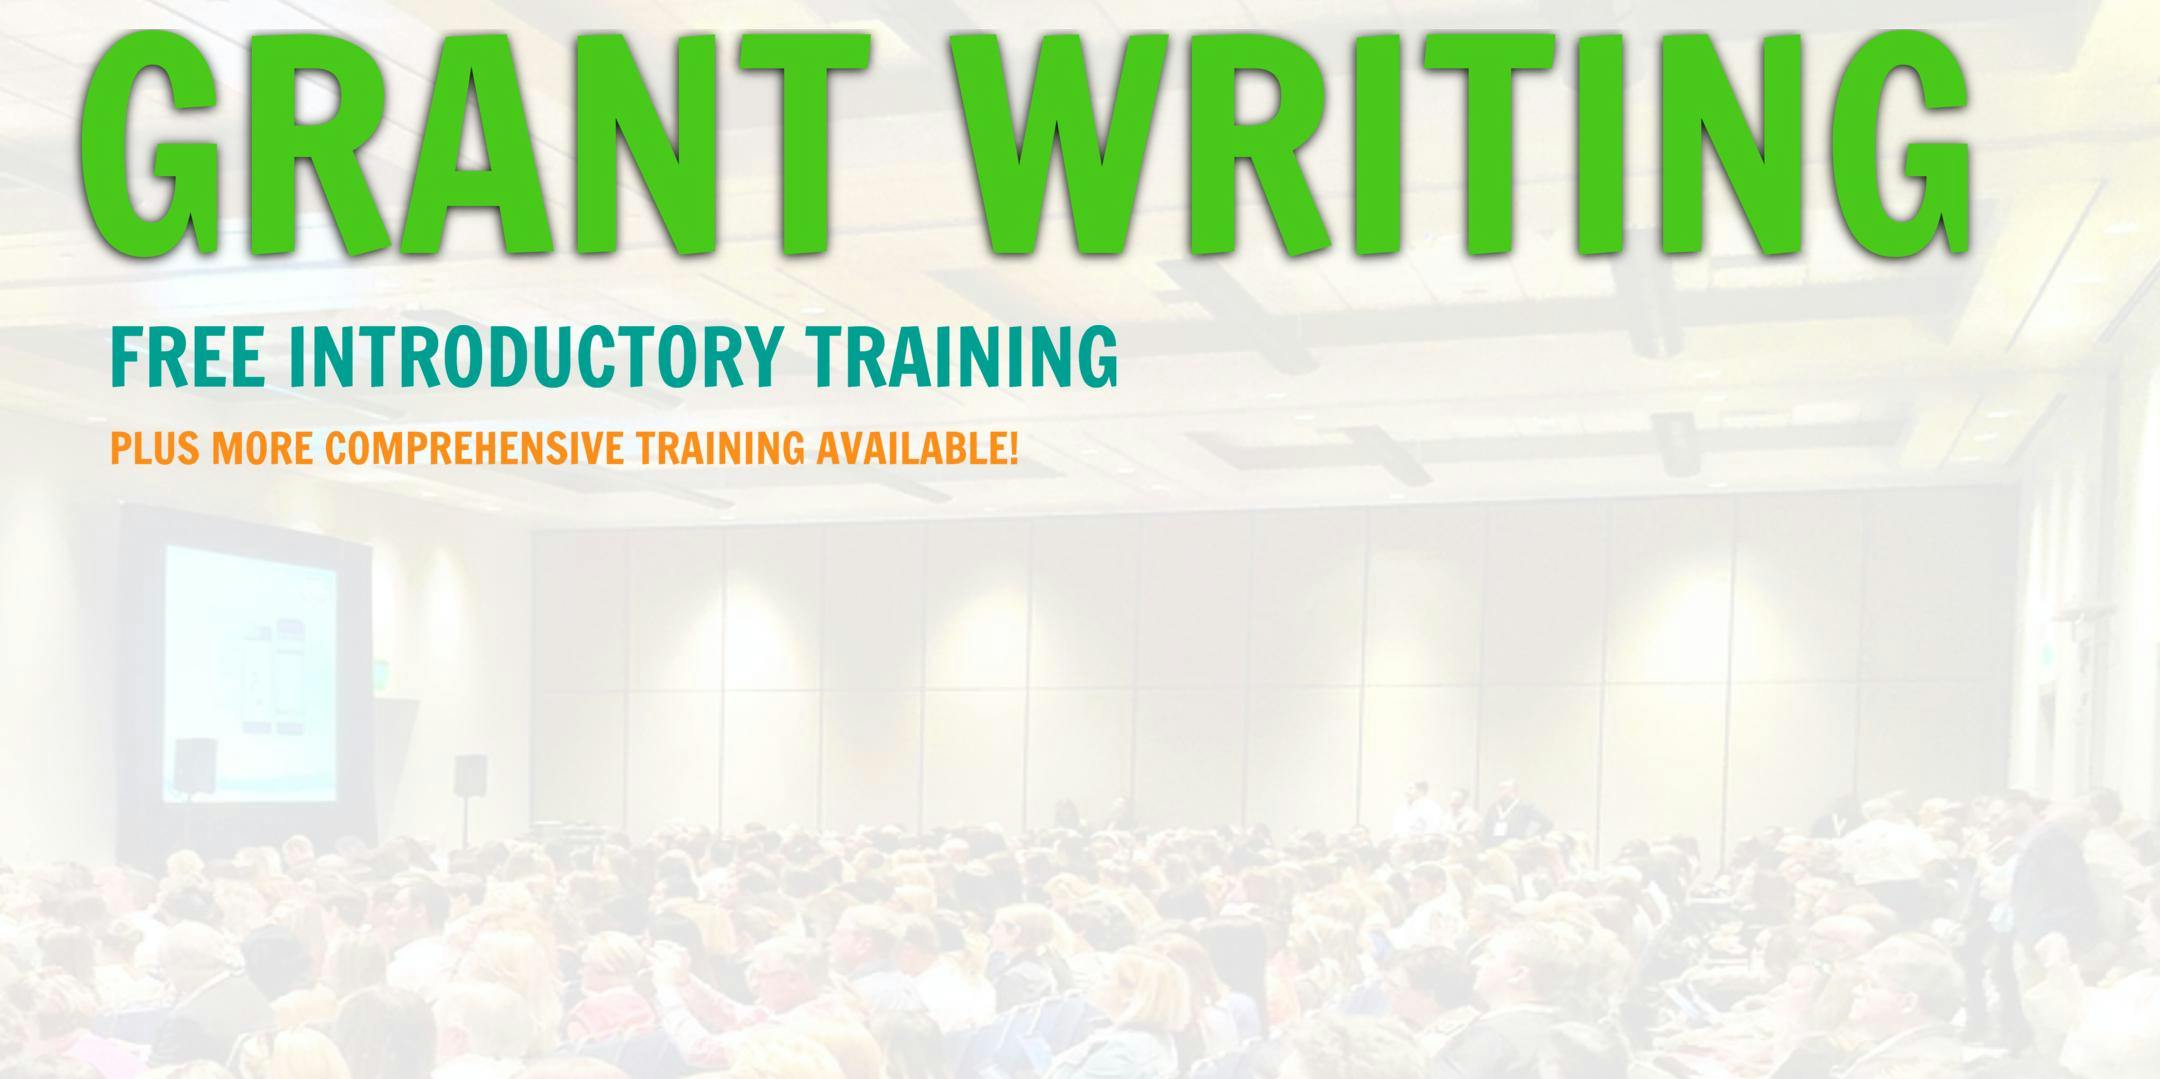 Grant Writing Introductory Training... Port St. Lucie, FL 